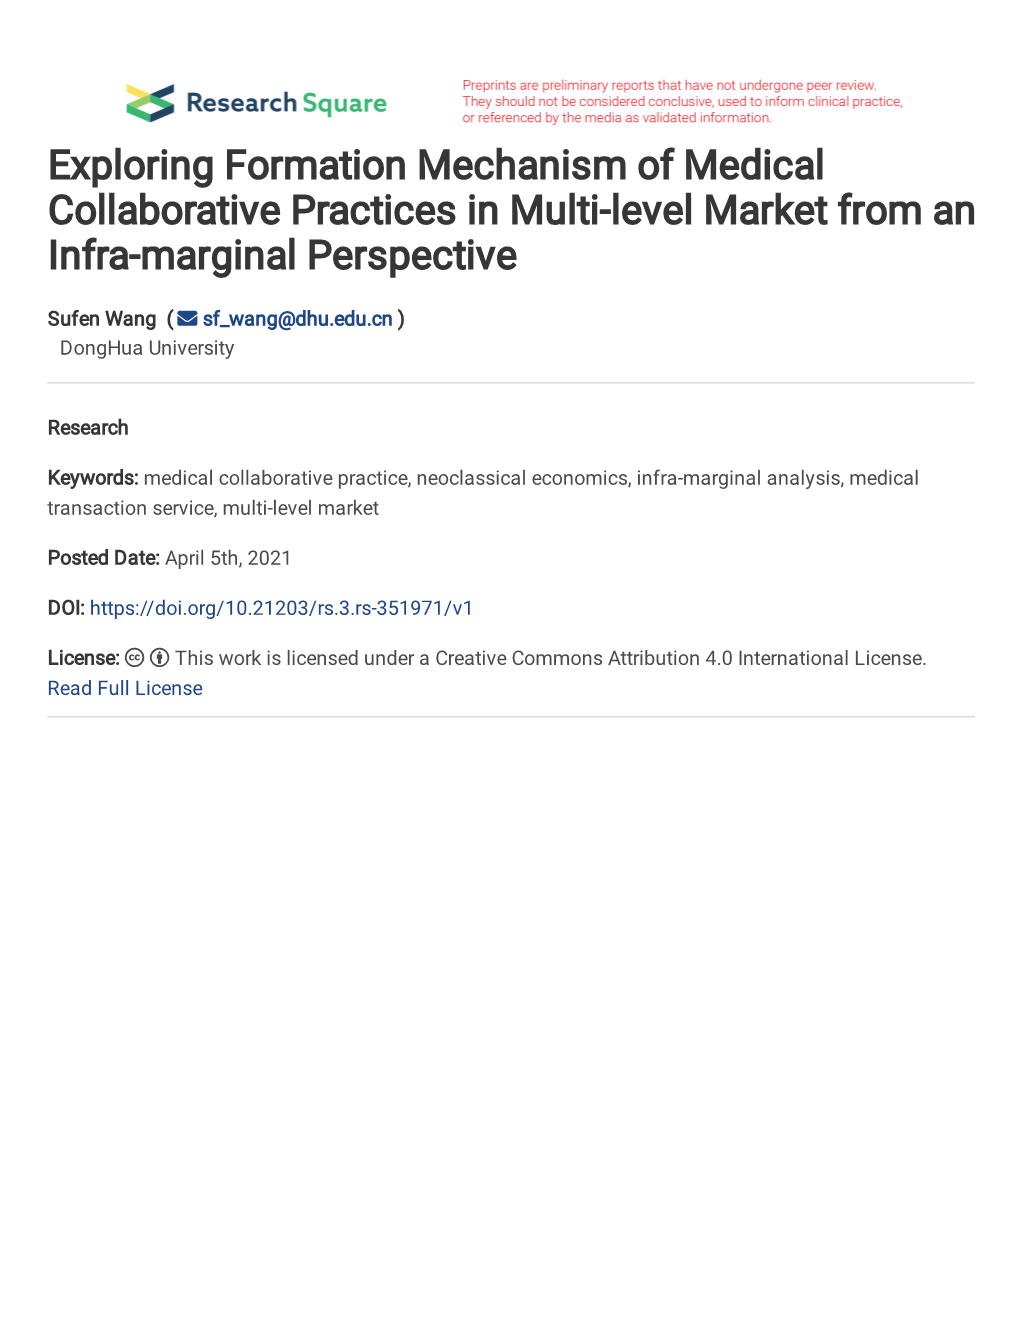 Exploring Formation Mechanism of Medical Collaborative Practices in Multi-Level Market from an Infra-Marginal Perspective